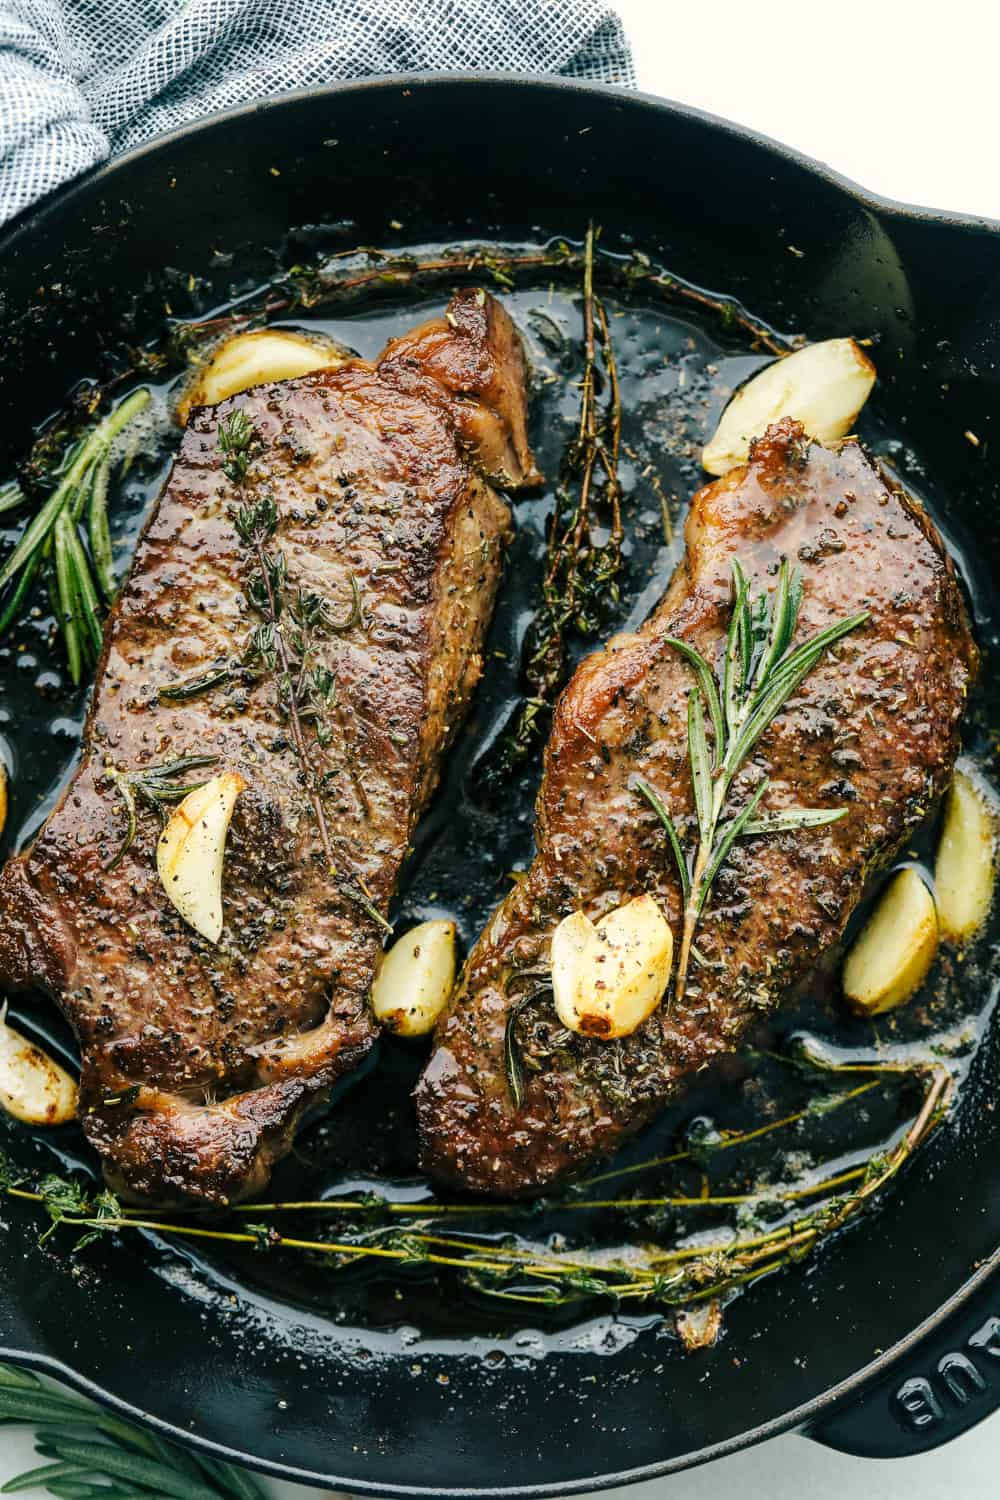 How to Cook The New York Strip Steak